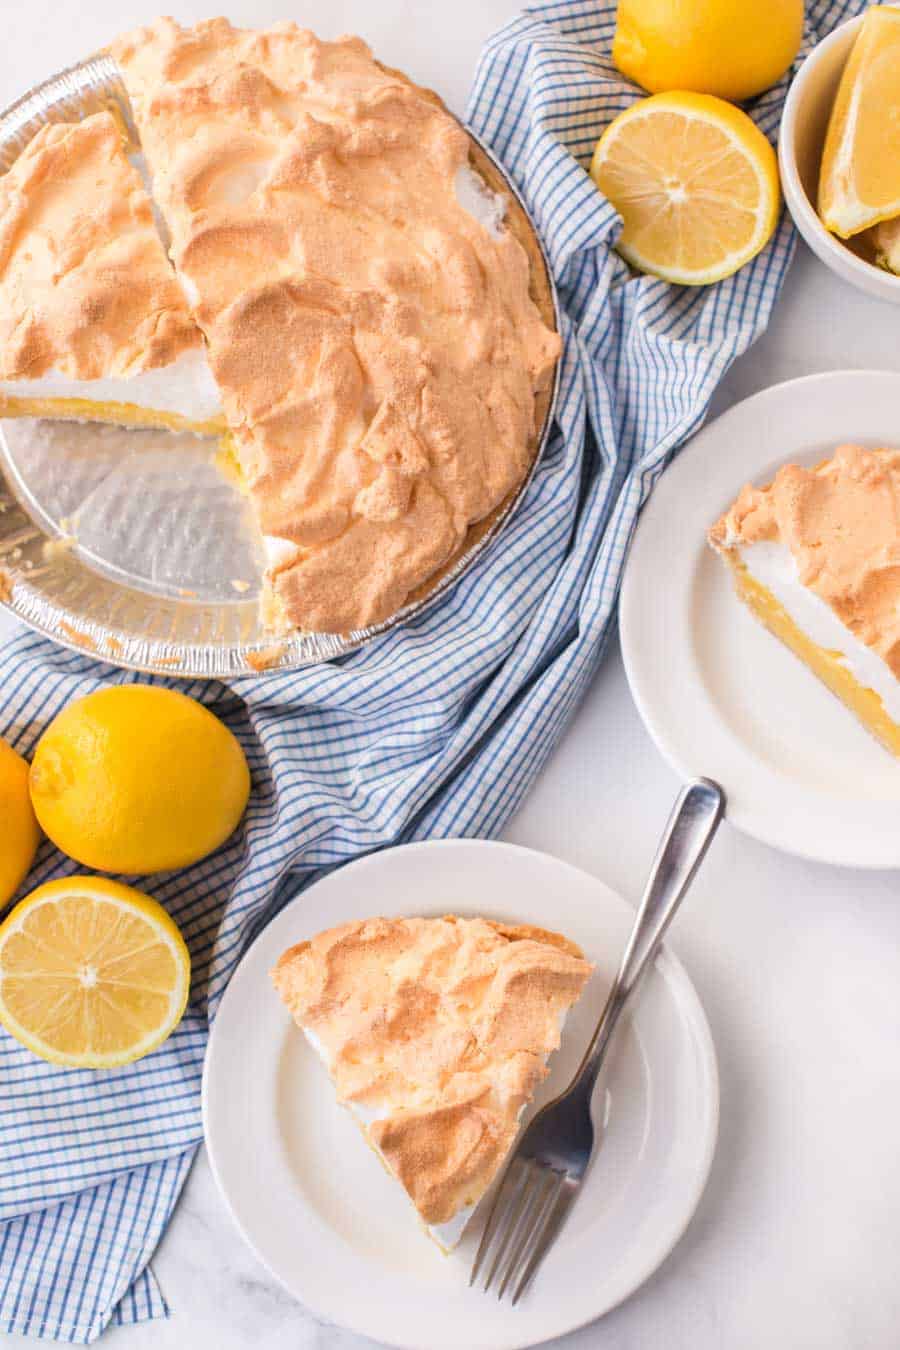 lemon meringue pie with slices cut on round white plates with forks lemons and blue checkered towel